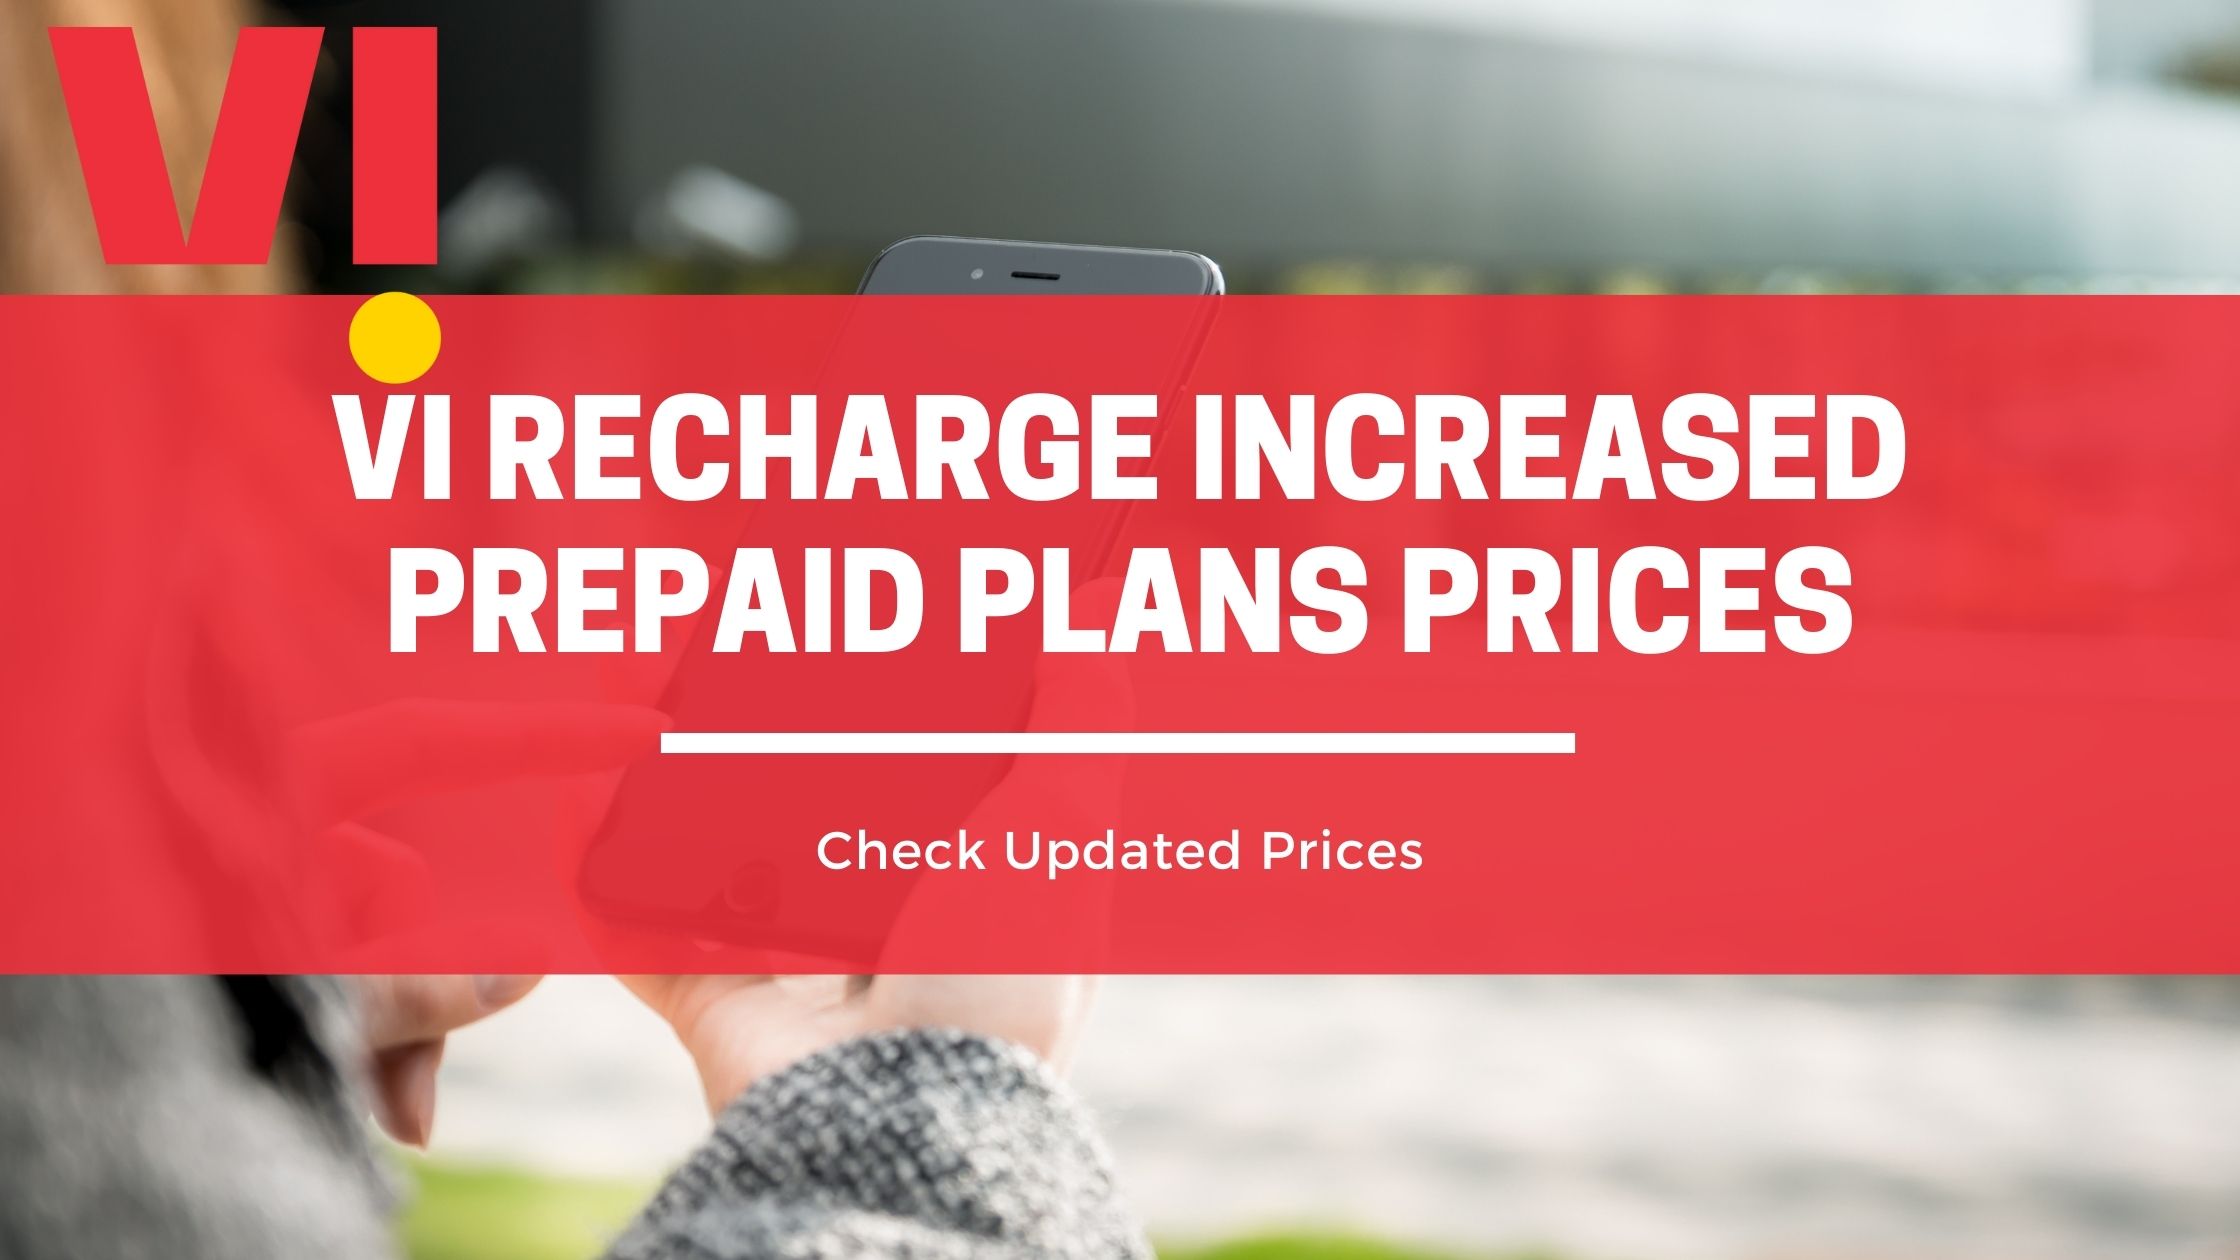  Vi Recharge Increased Prepaid Plans Price: Check New Prices